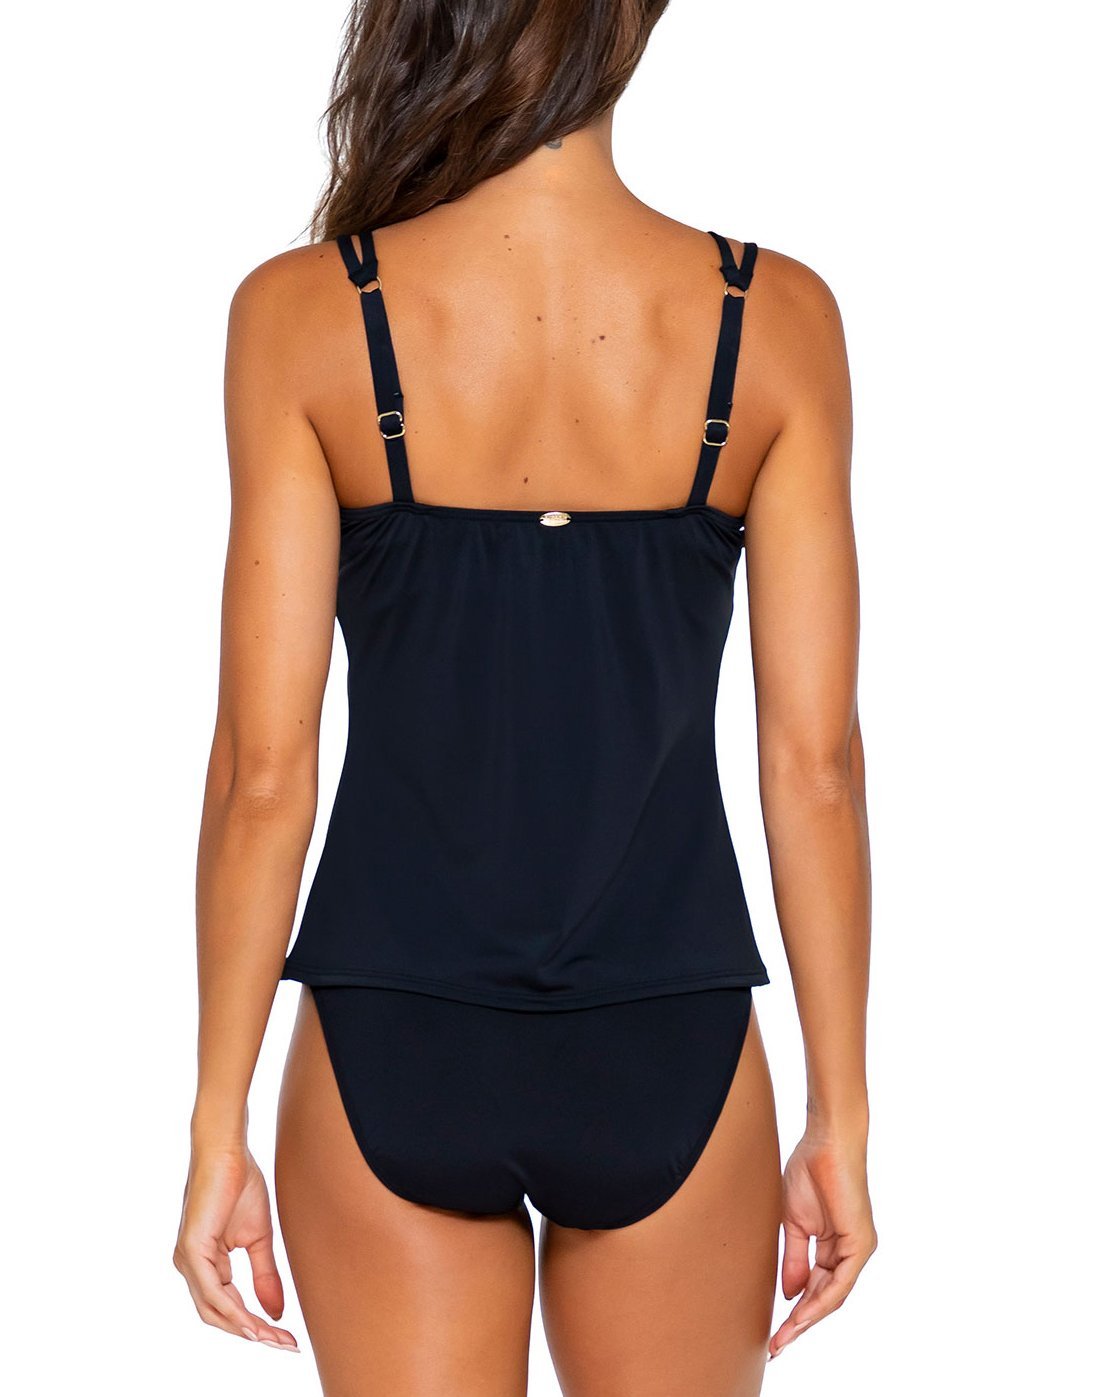 Backside of a model on a white background wearing a black tankini with a straight back and adjustable straps